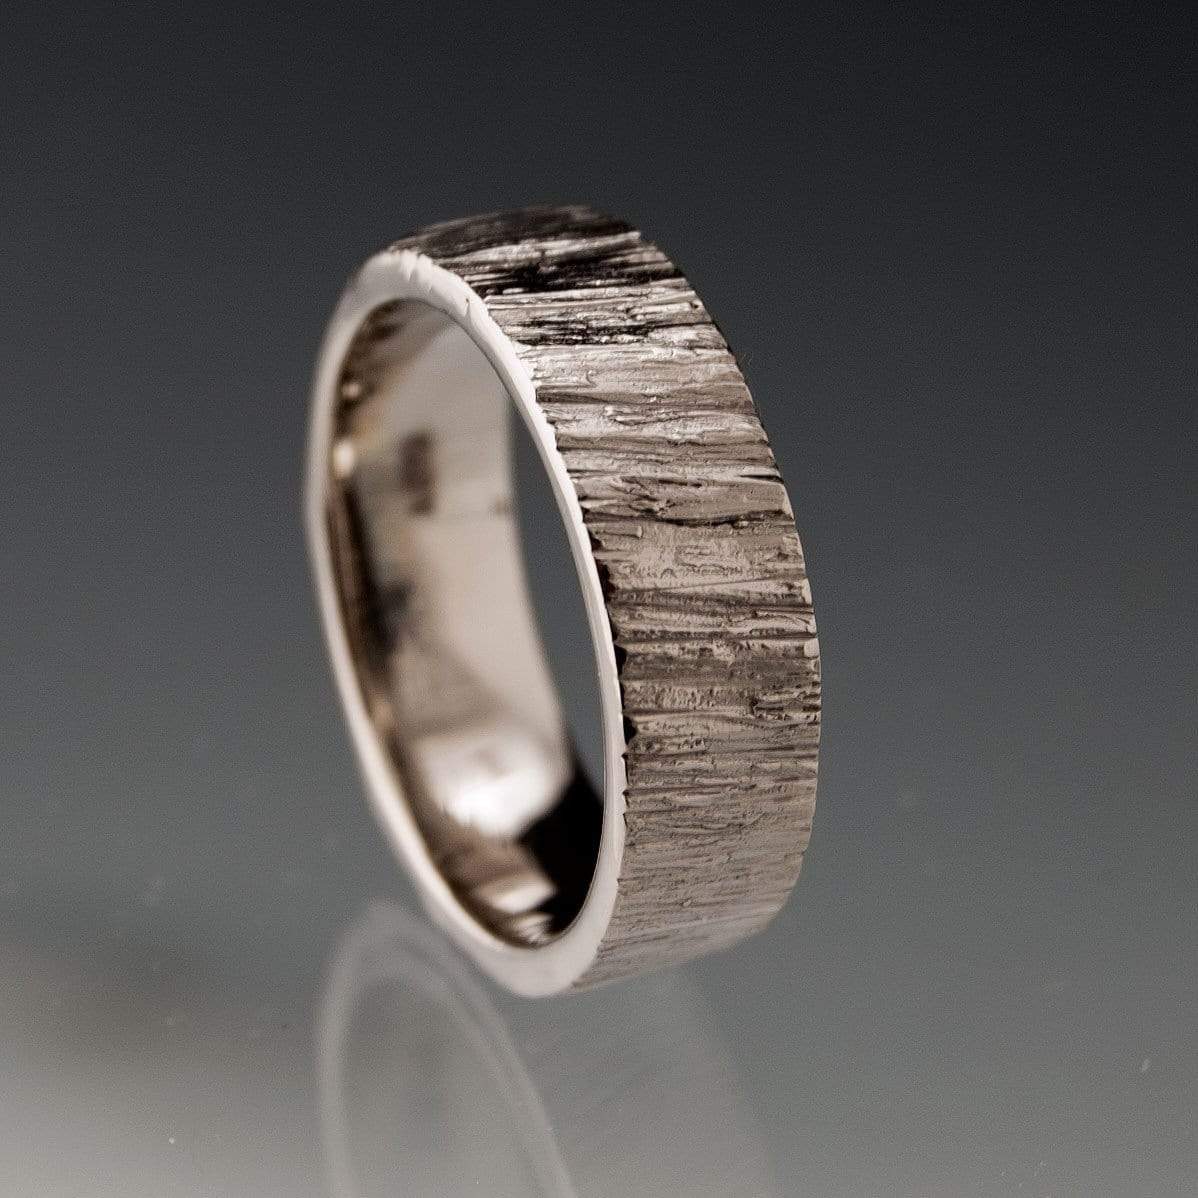 Wide Saw Cut Texture Wedding Band 6mm width / Sterling Silver Ring by Nodeform